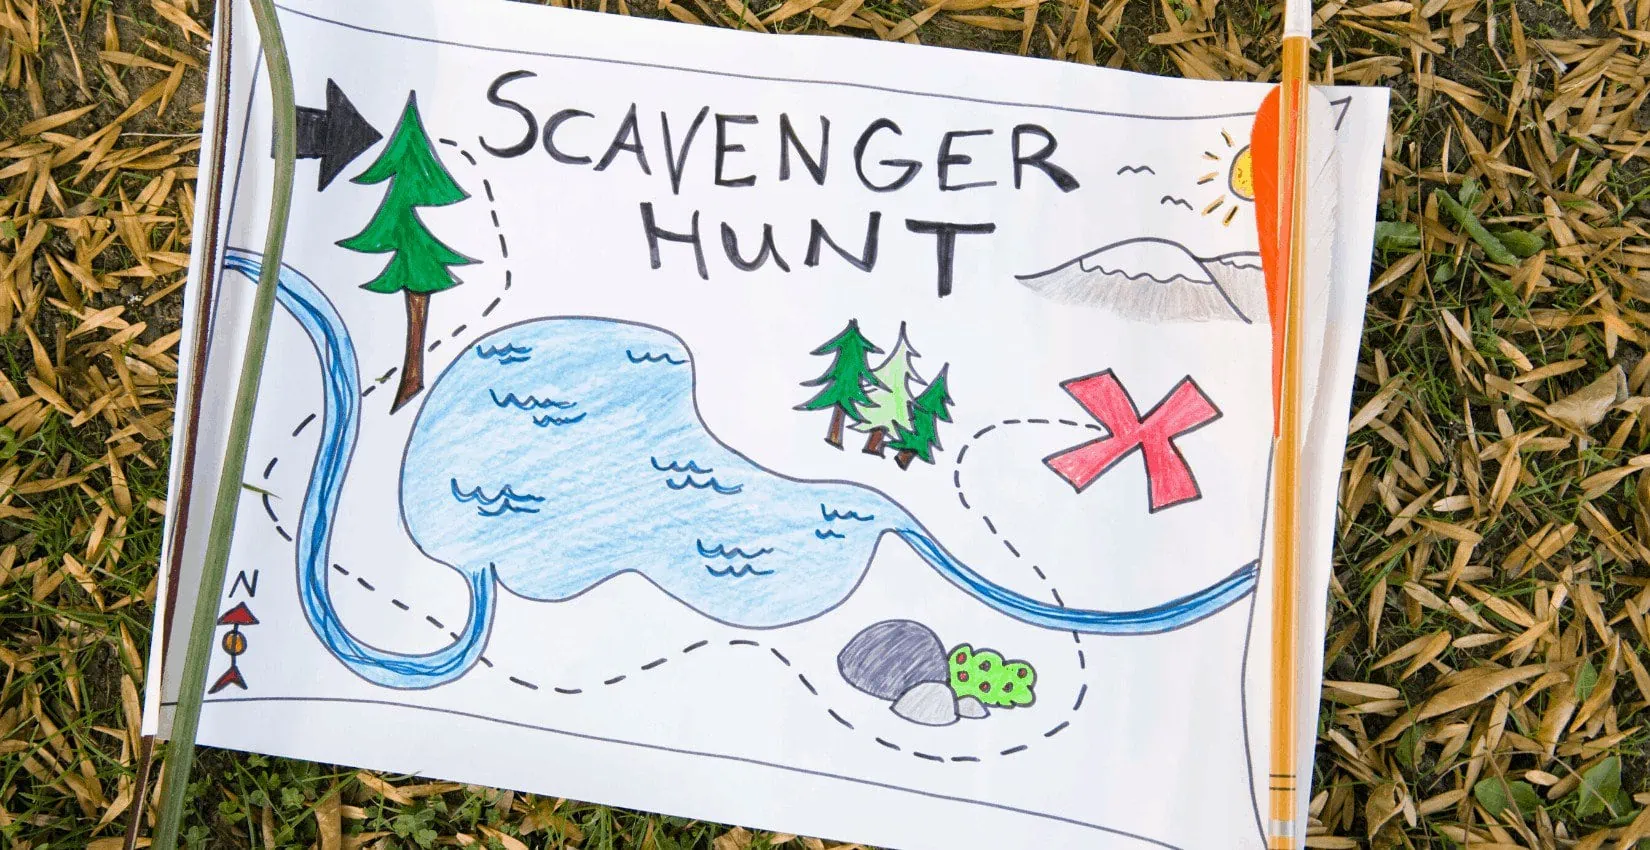 Spanish Scavenger Hunts (with Free Printable Checklists)